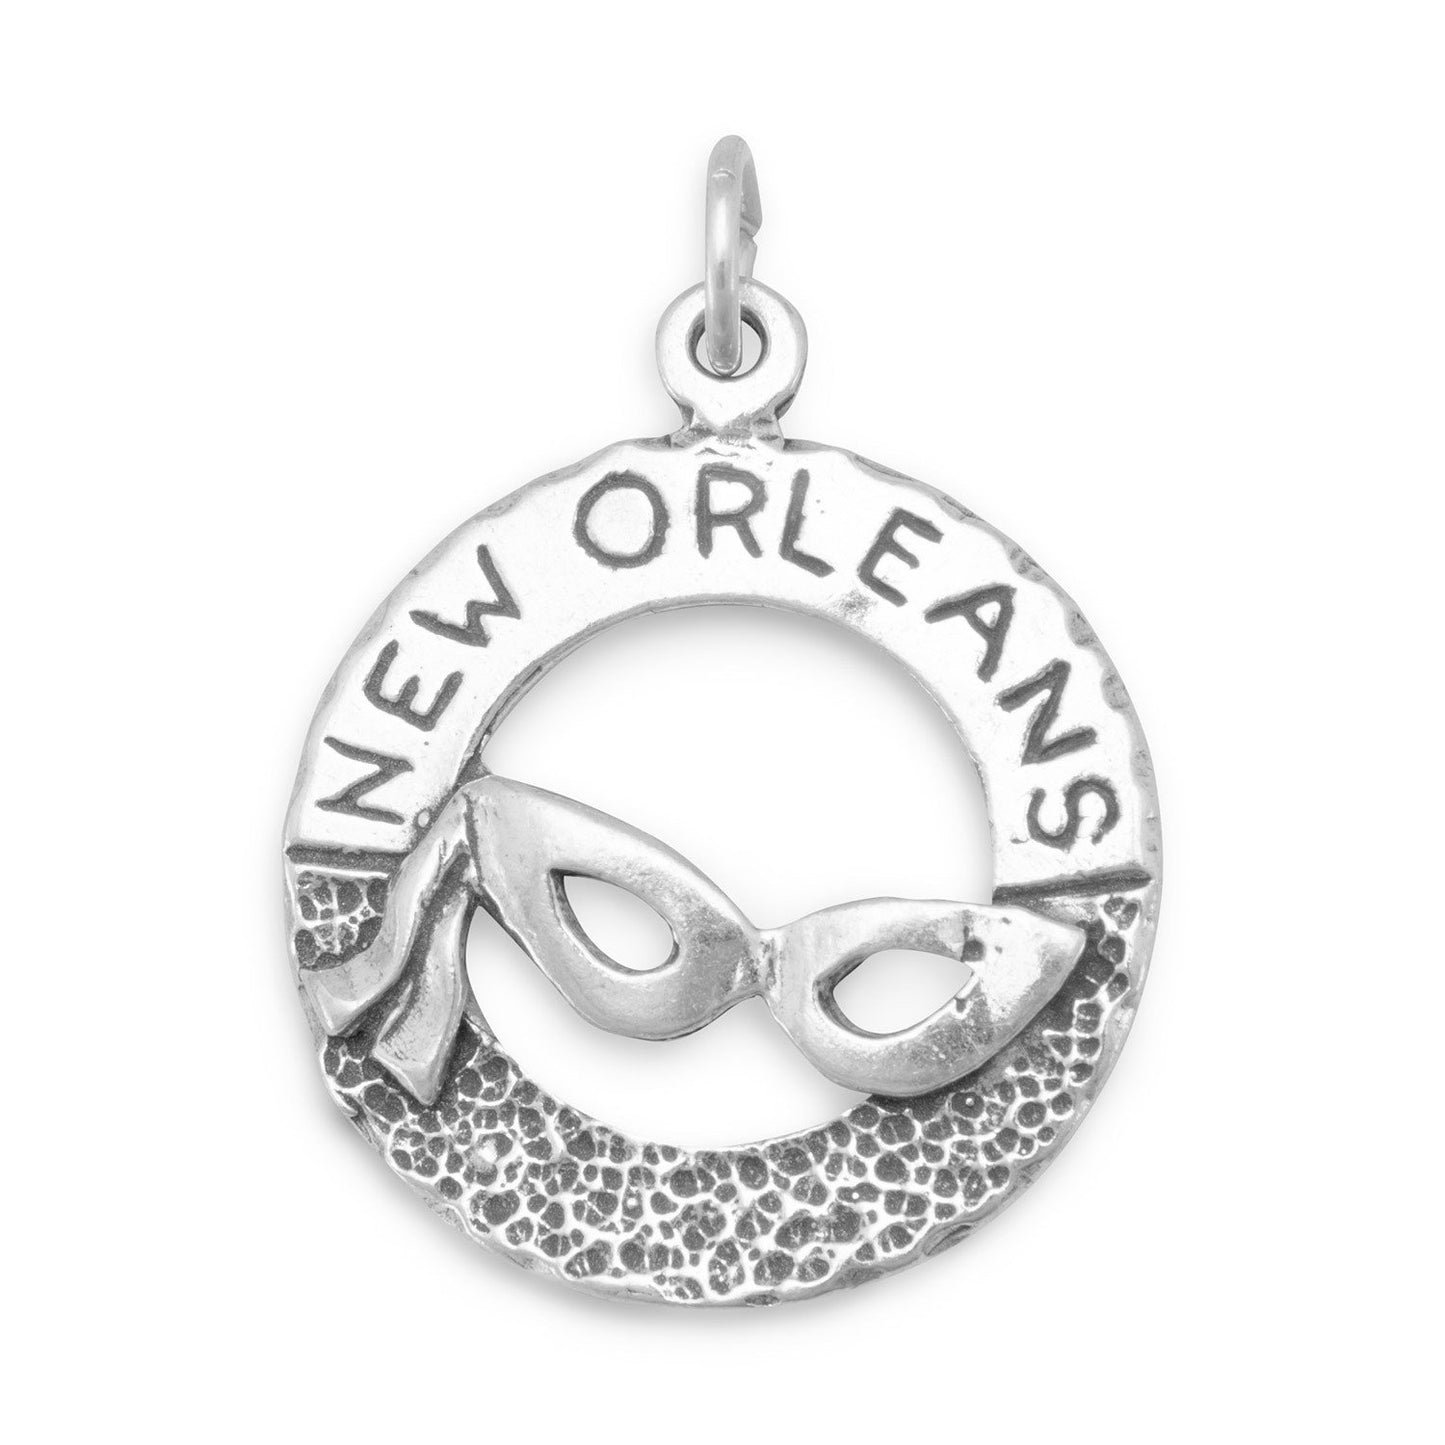 Sterling Silver New Orleans with Mardi Gras Mask Bracelet Charm